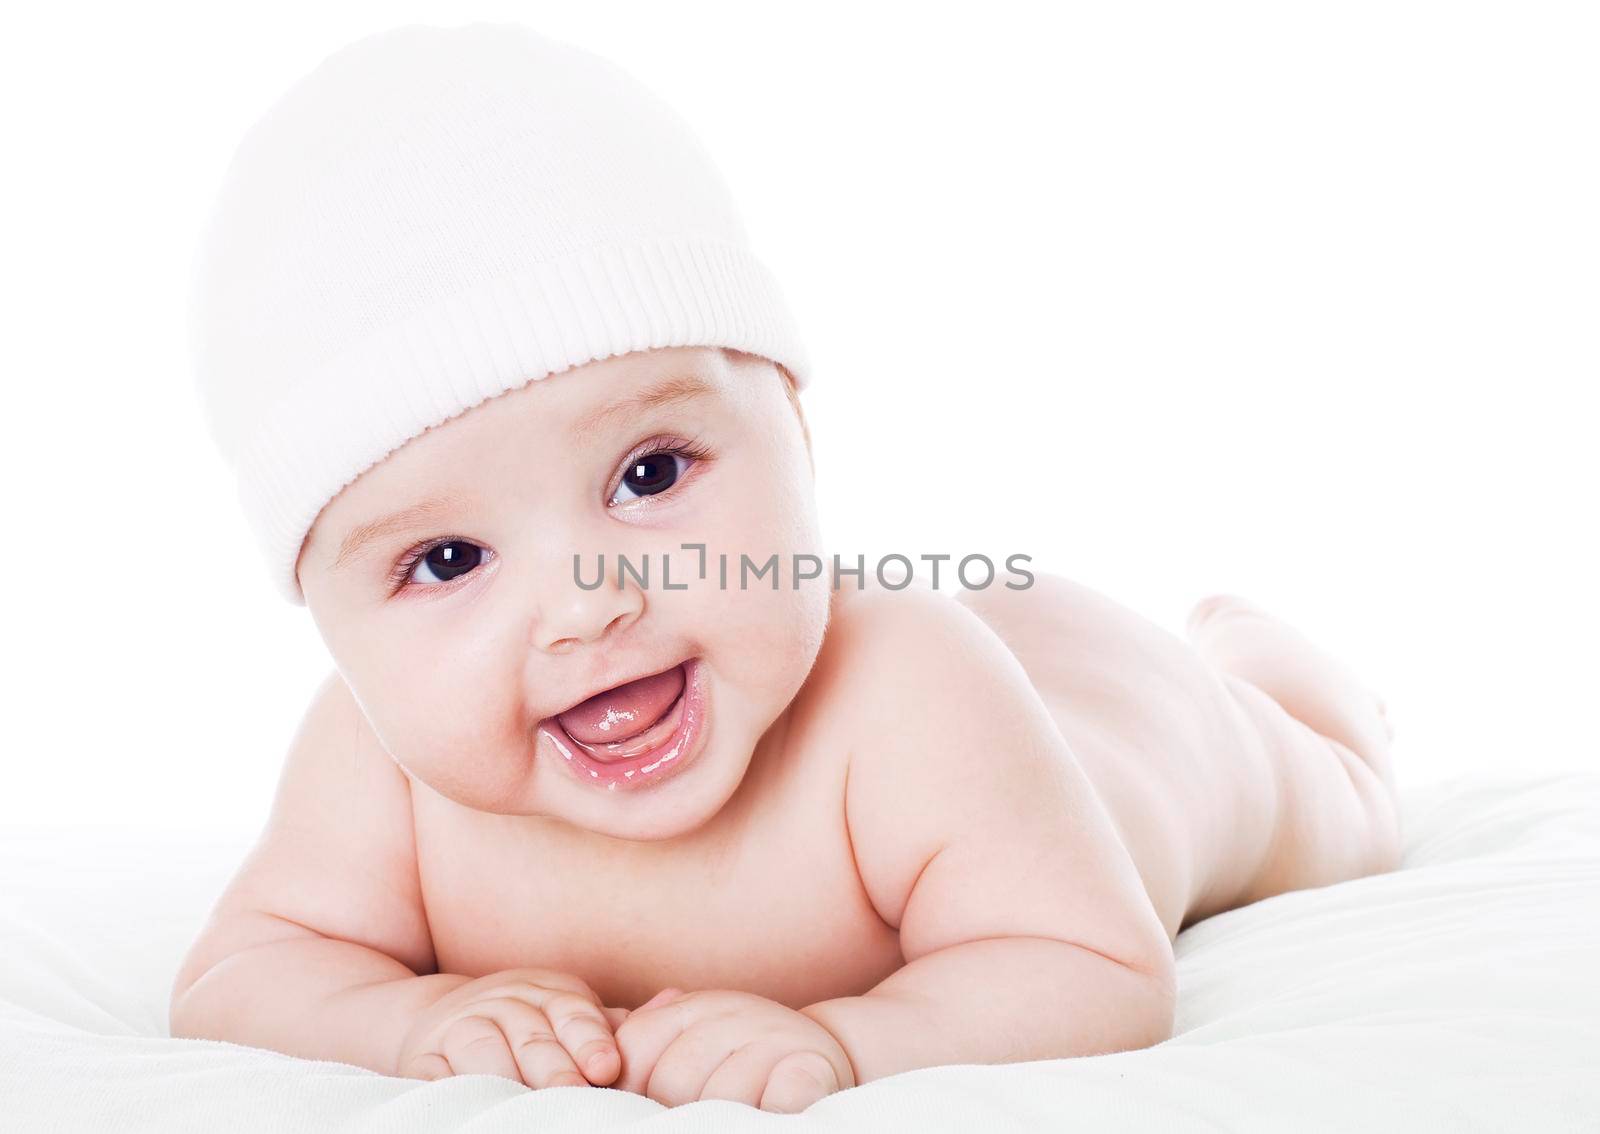 Cute baby lying on stomach on white floor background, wearing a cap and smiling big.